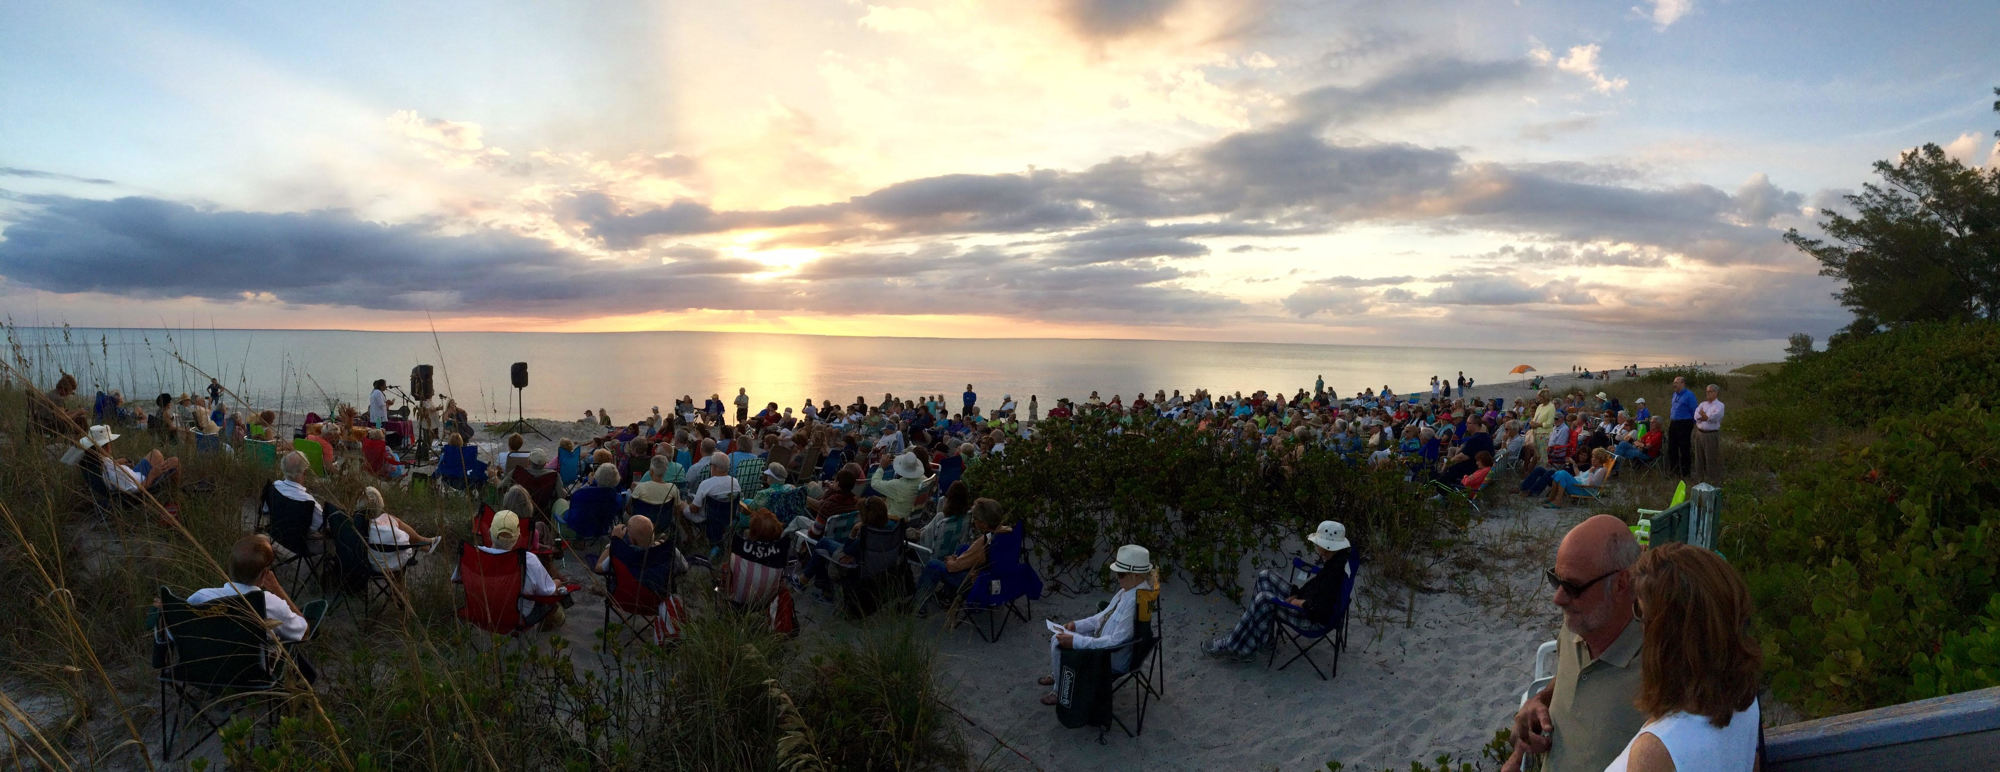 Hermitage Artist Retreat's sunset beach presentations attract hundreds of viewers for what Rodgers calls 